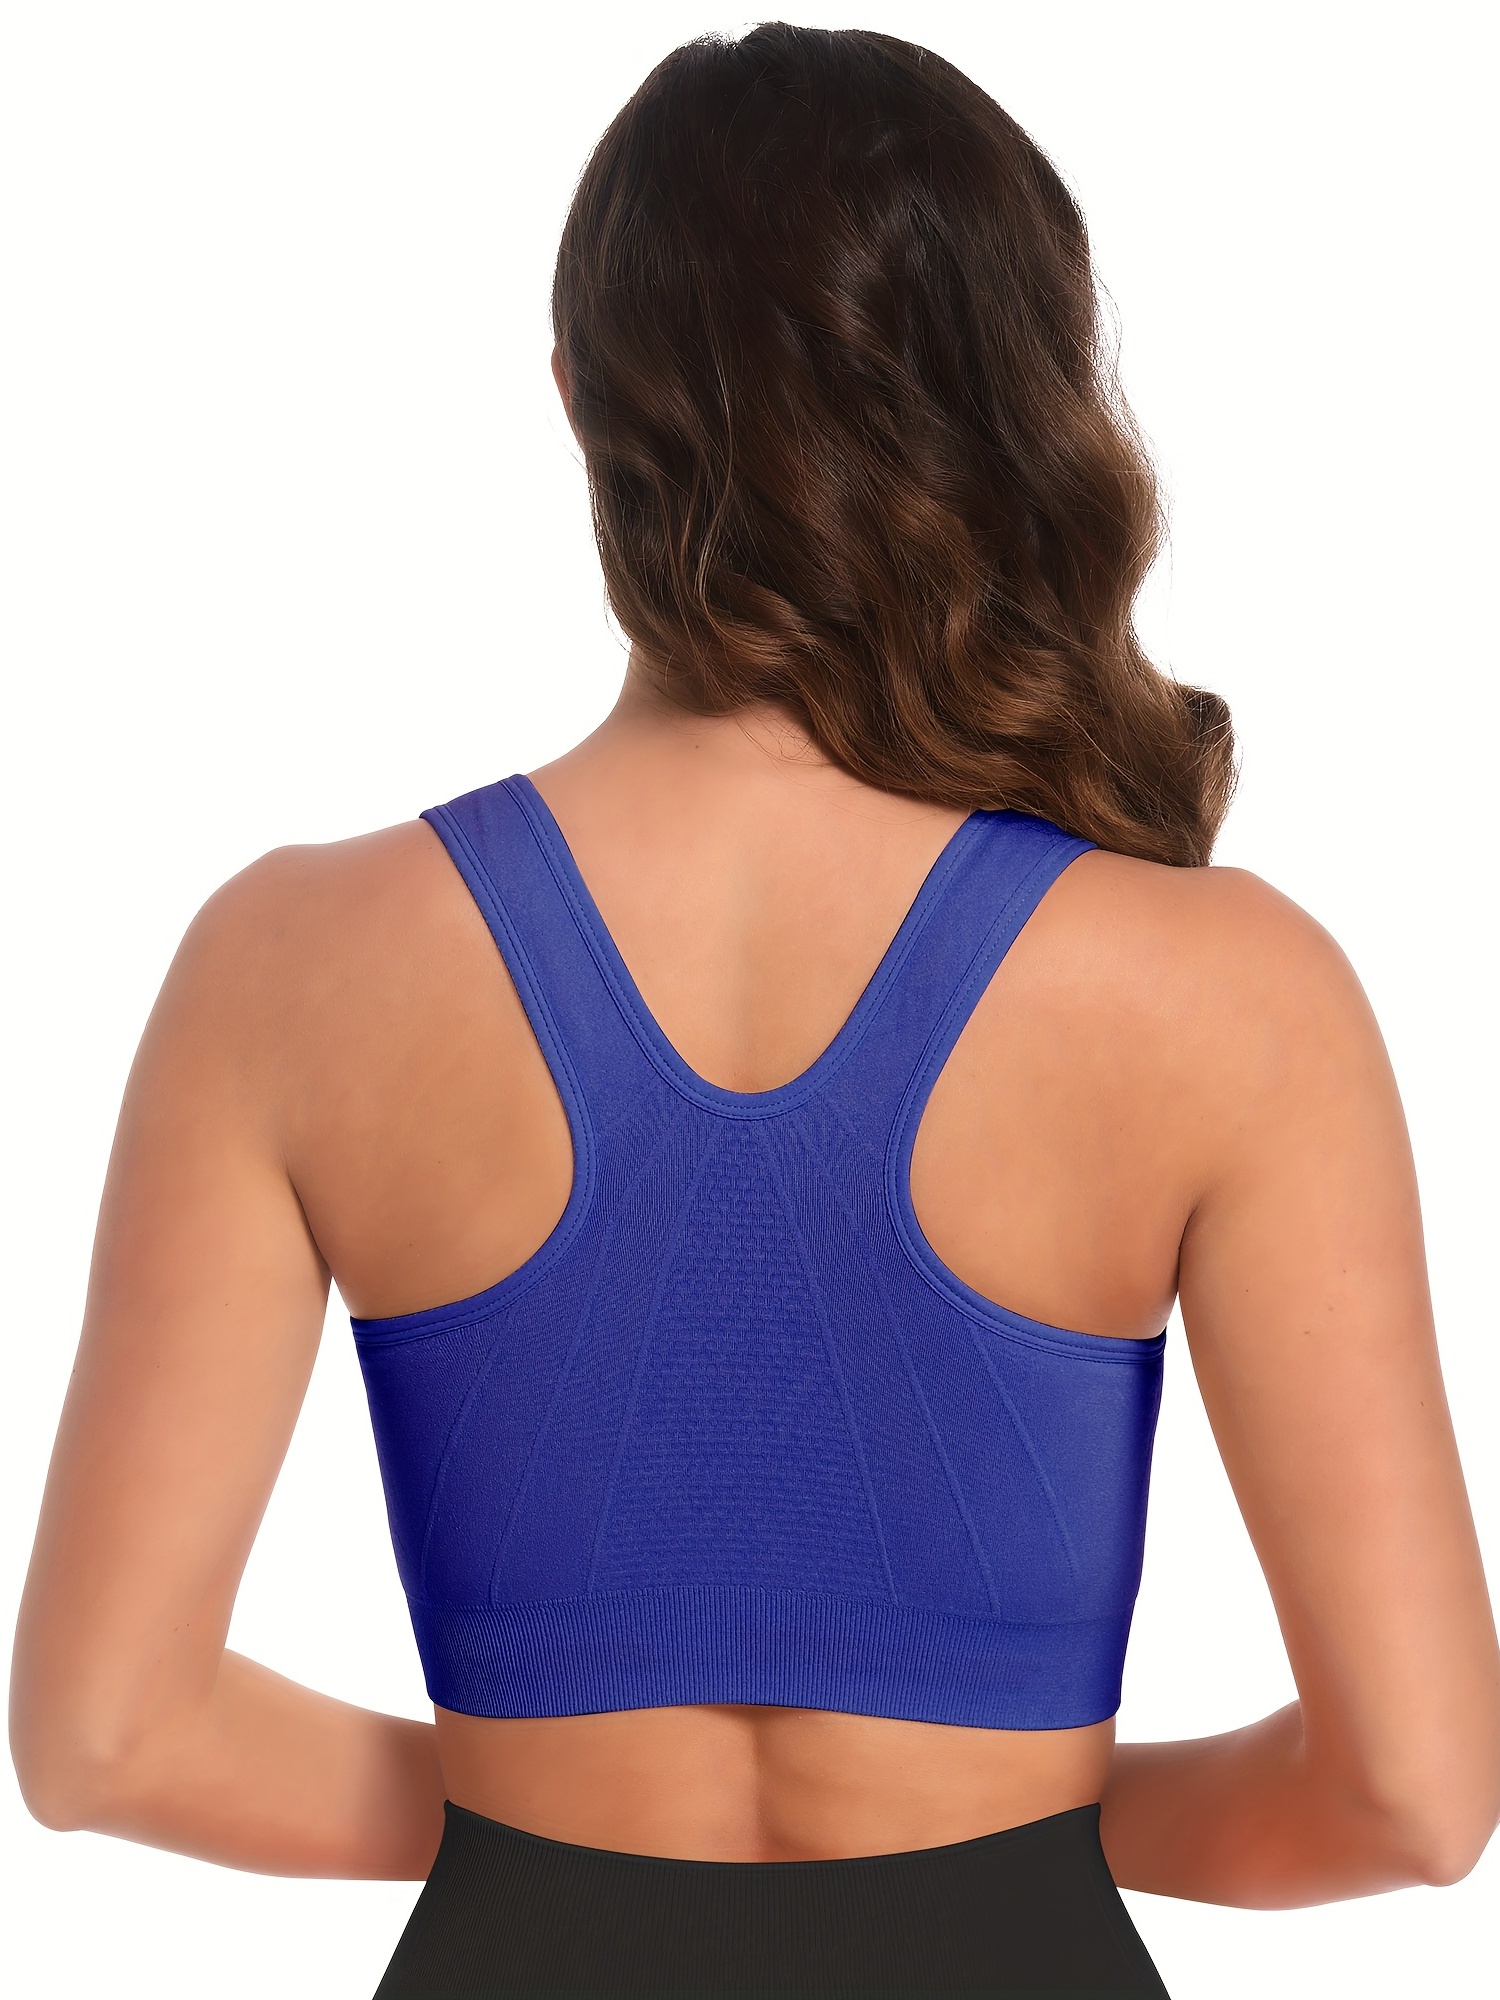  Fapreit Womens Zip Front Closure Sports Bra - Seamless  Wirefree Post Surgery Padded Racerback Workout Gym Yoga Bras 3 Pack